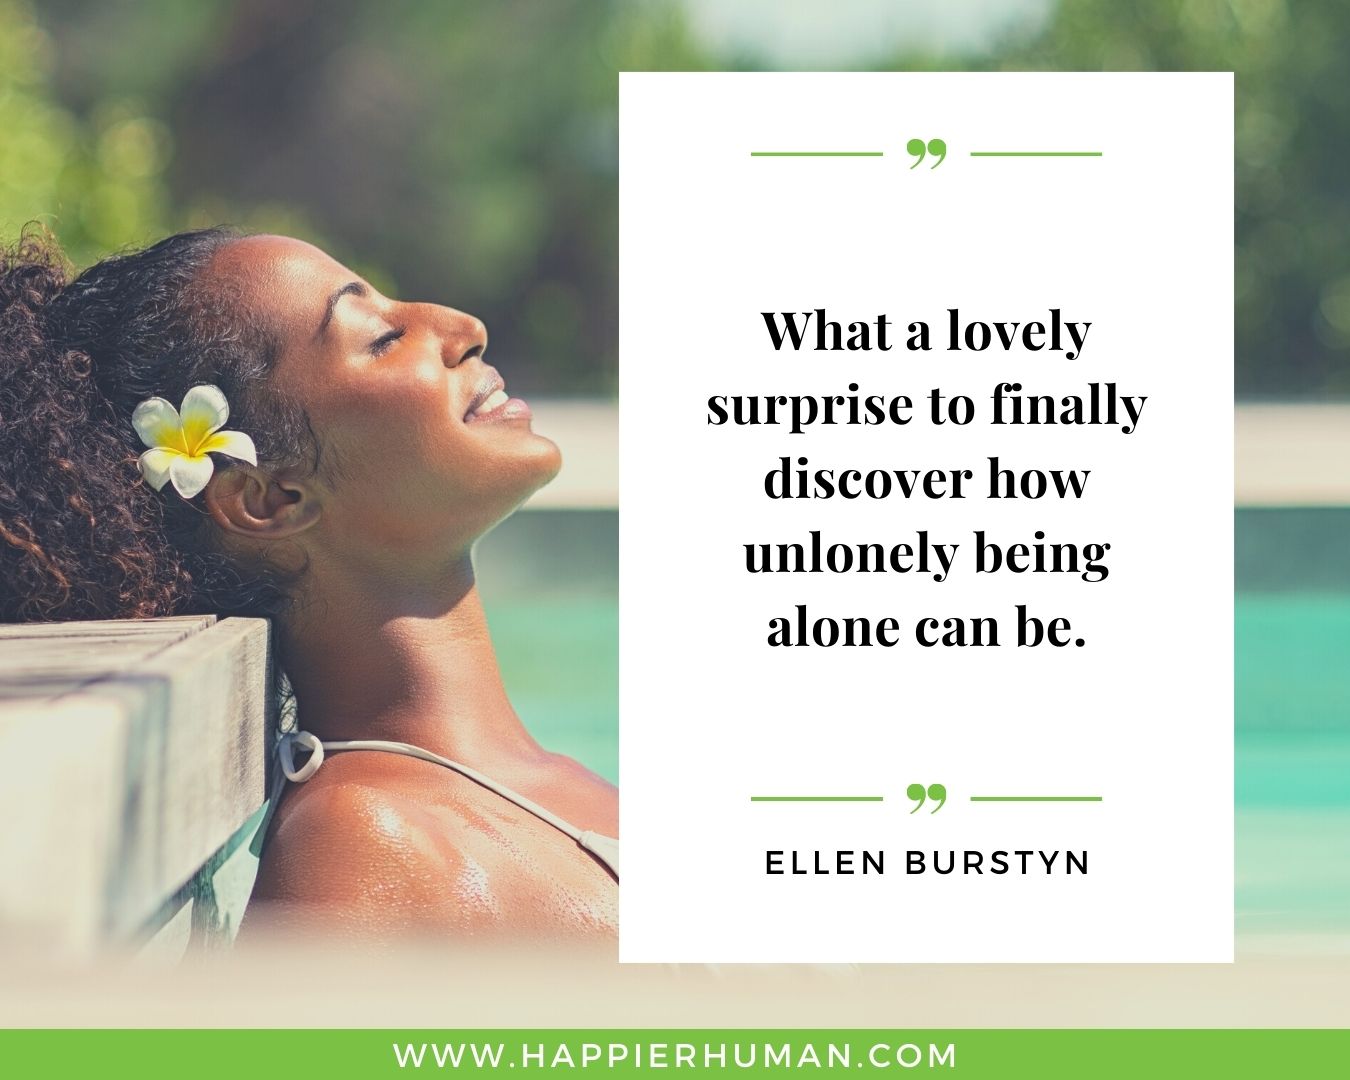 Introvert Quotes - “What a lovely surprise to finally discover how unlonely being alone can be.” – Ellen Burstyn